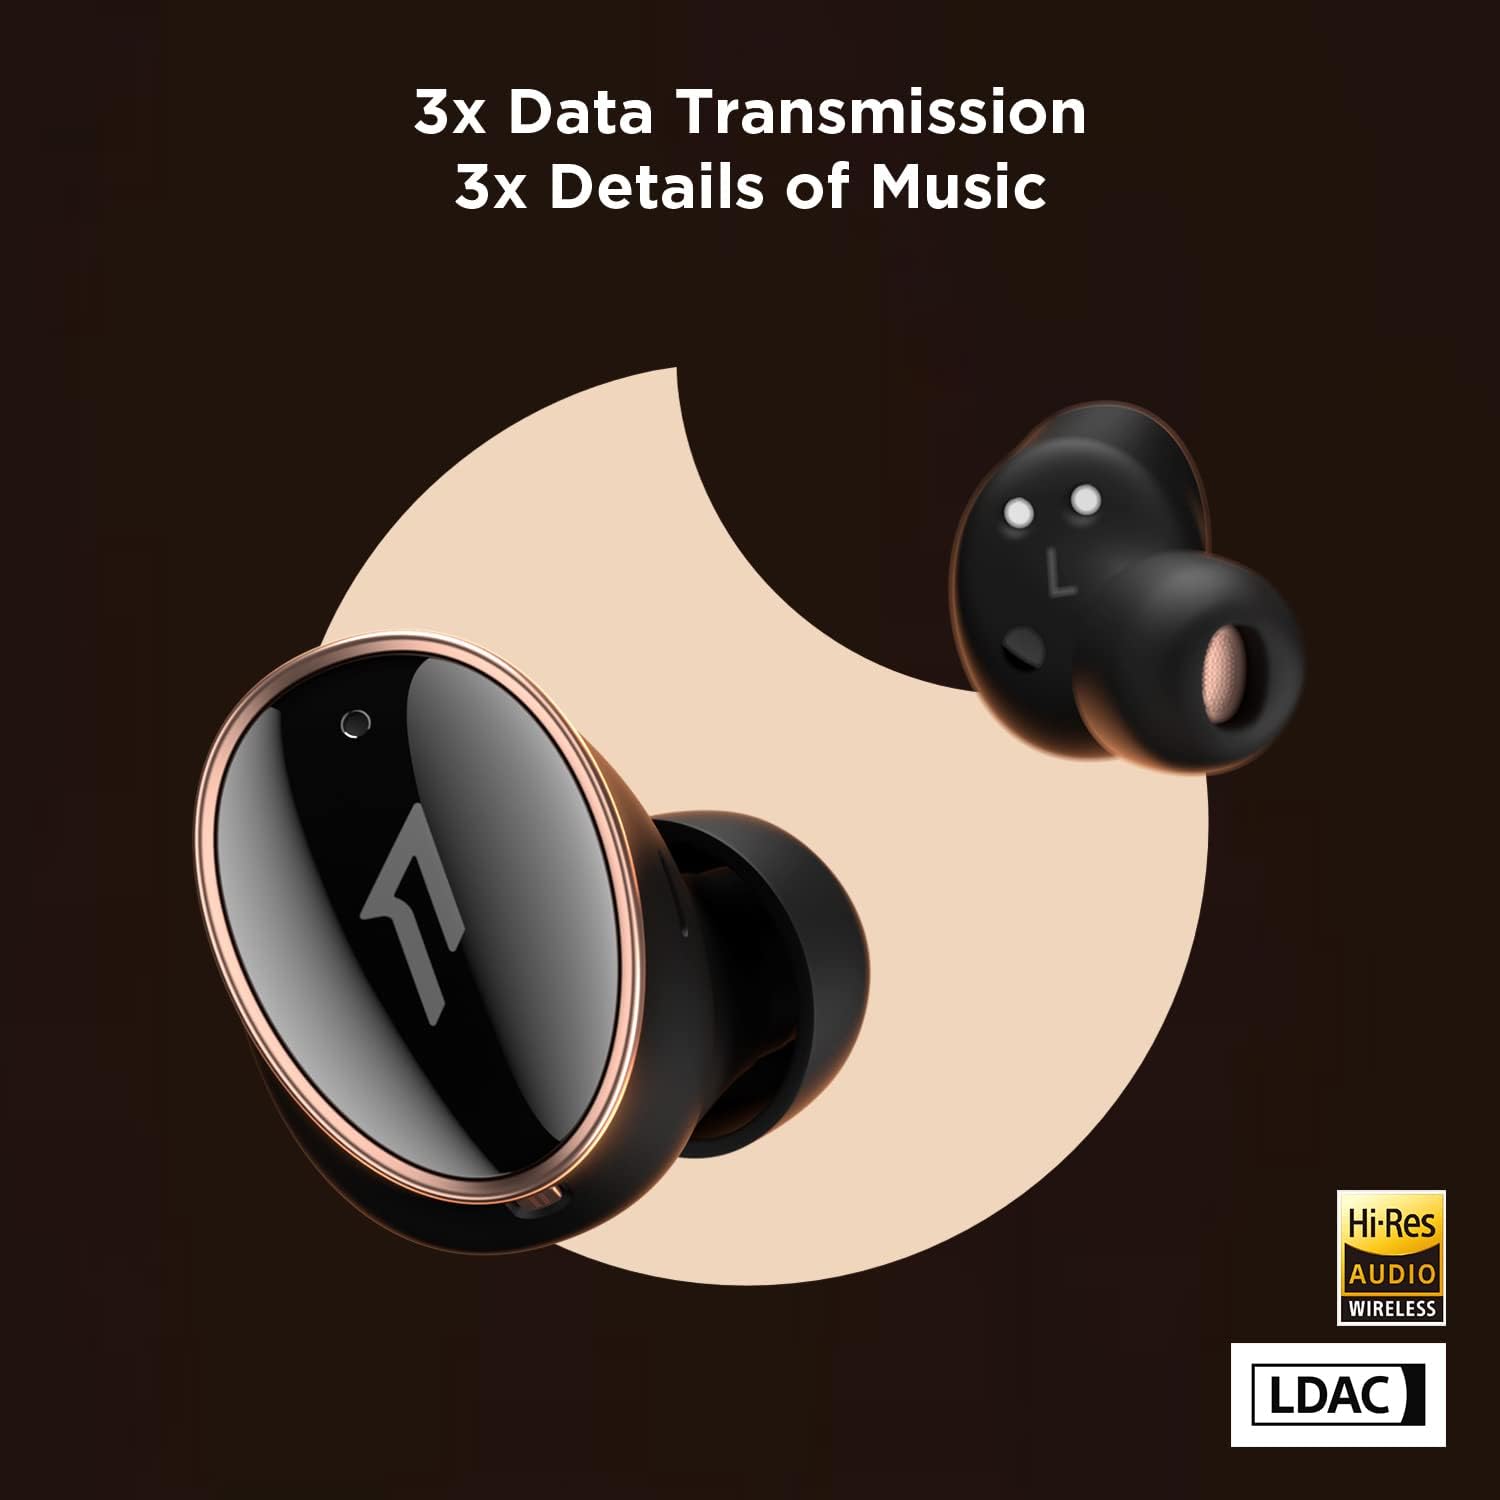 1MORE EVO EH902 ANC Wireless Earbuds - Black